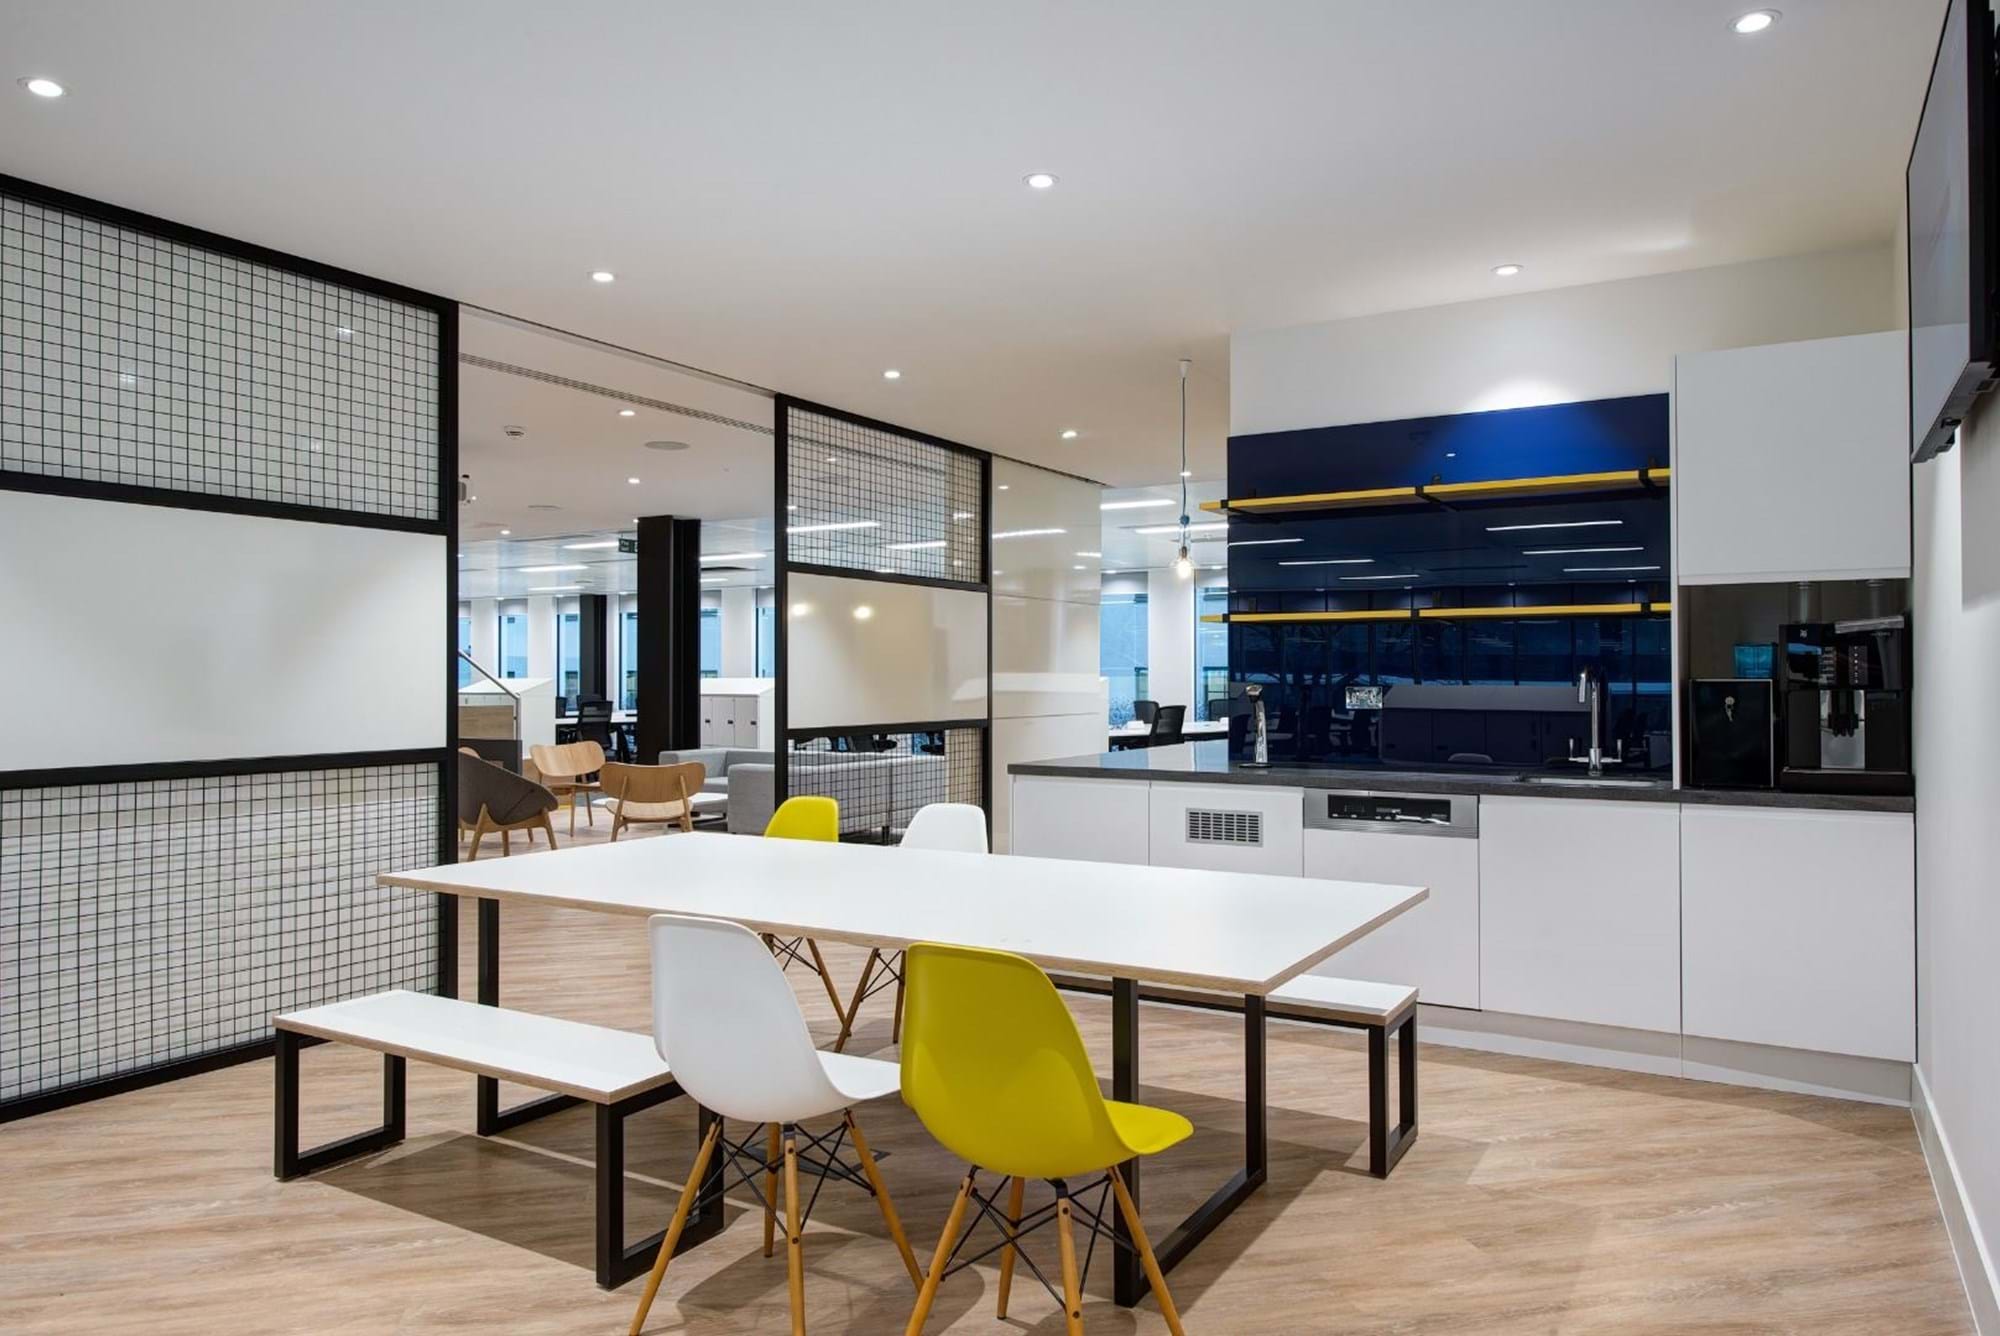 Modus Workspace office design, fit out and refurbishment - William Hill - William Hill 16 highres sRGB.jpg